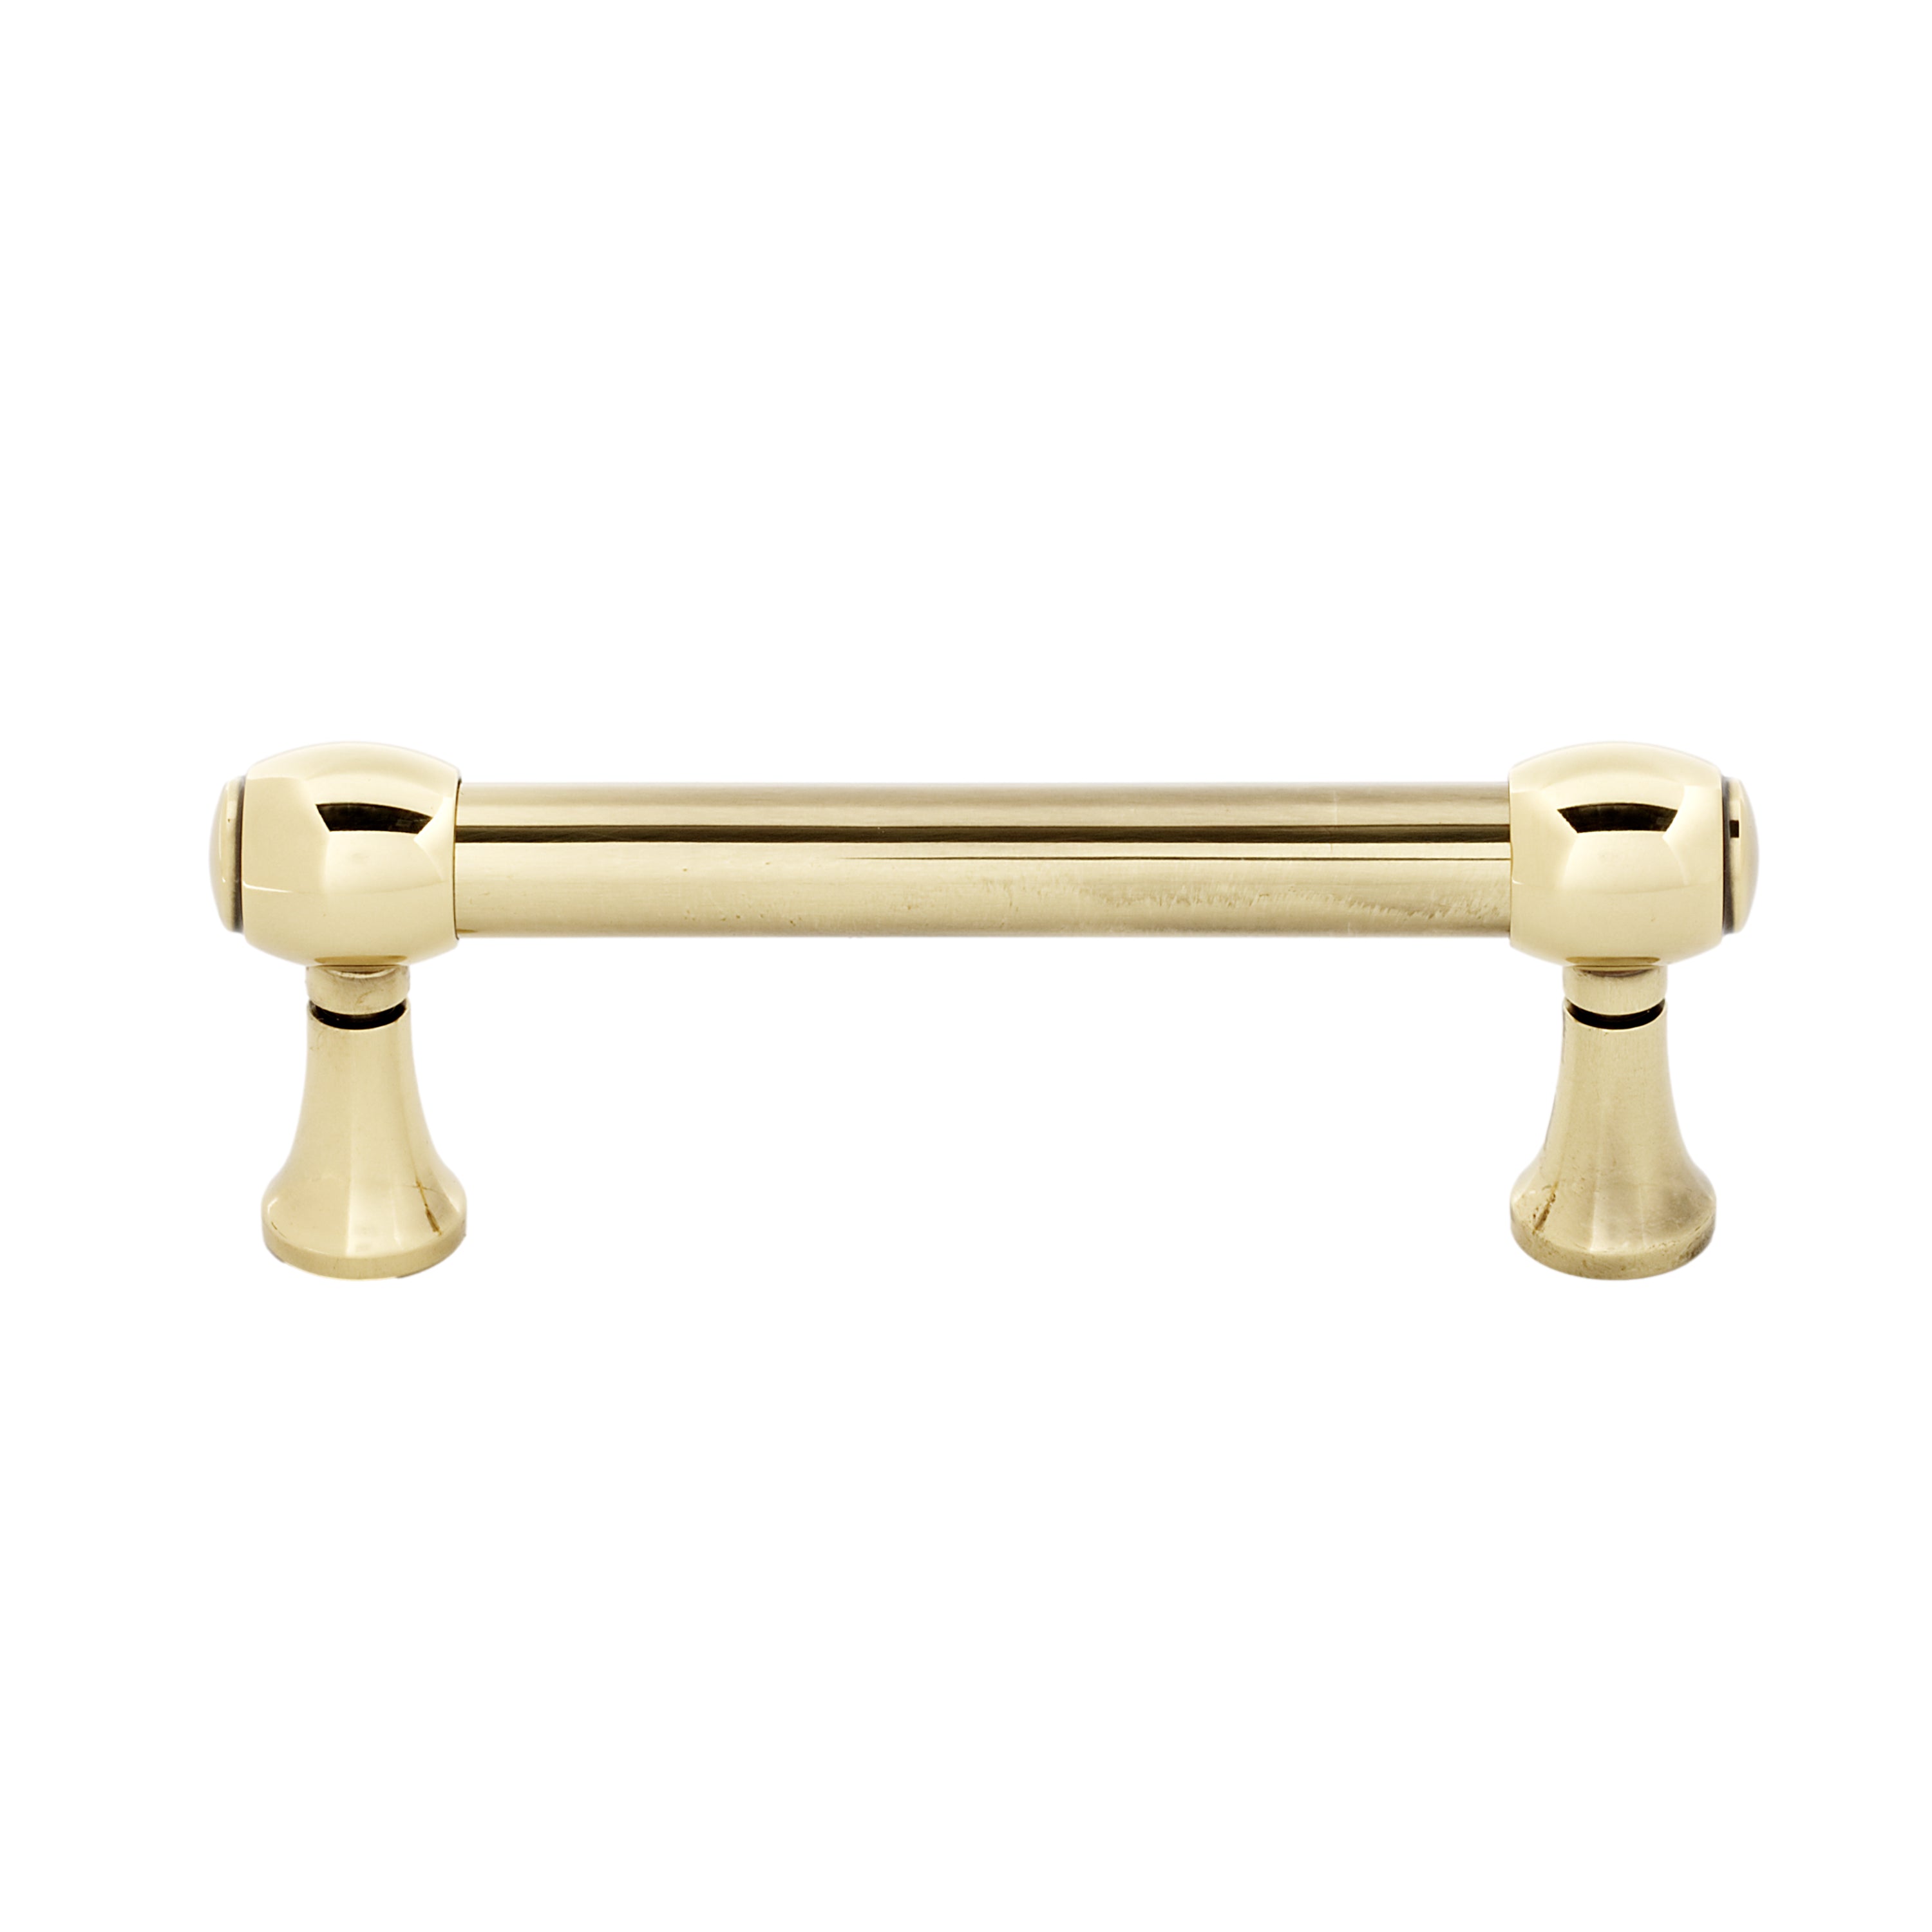 Old Brass Royale Cabinet Knobs and Drawer Pulls